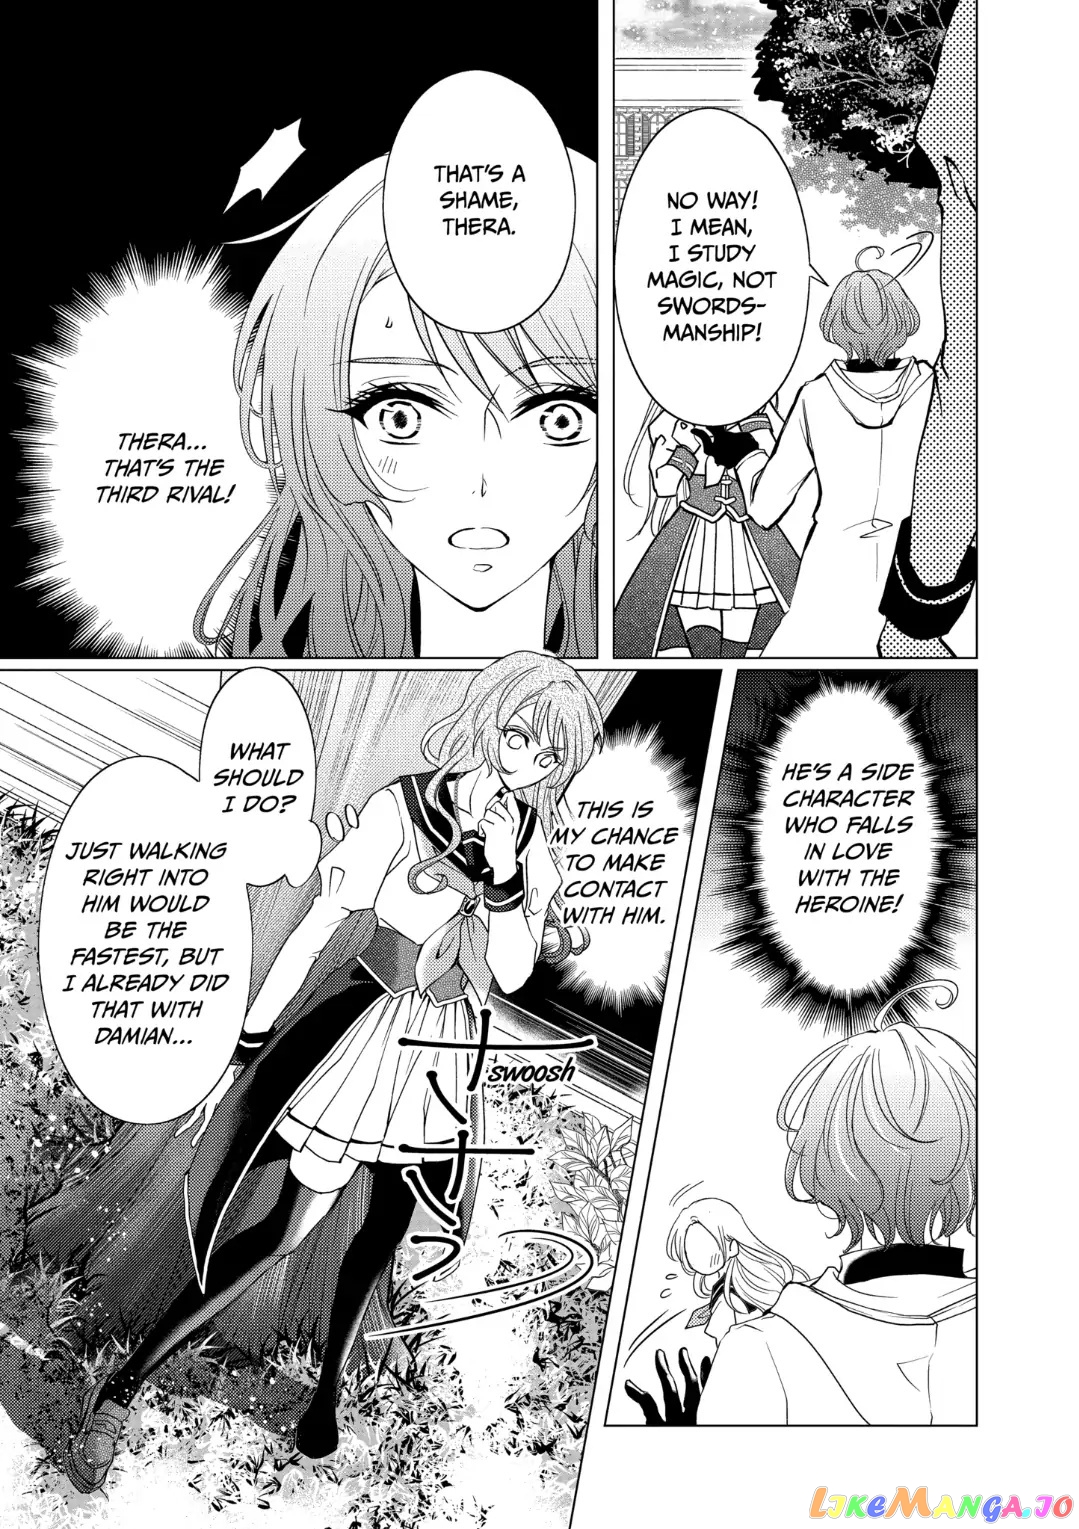 On Her 94th Reincarnation This Villainess Became the Heroine! chapter 8.1 - page 11